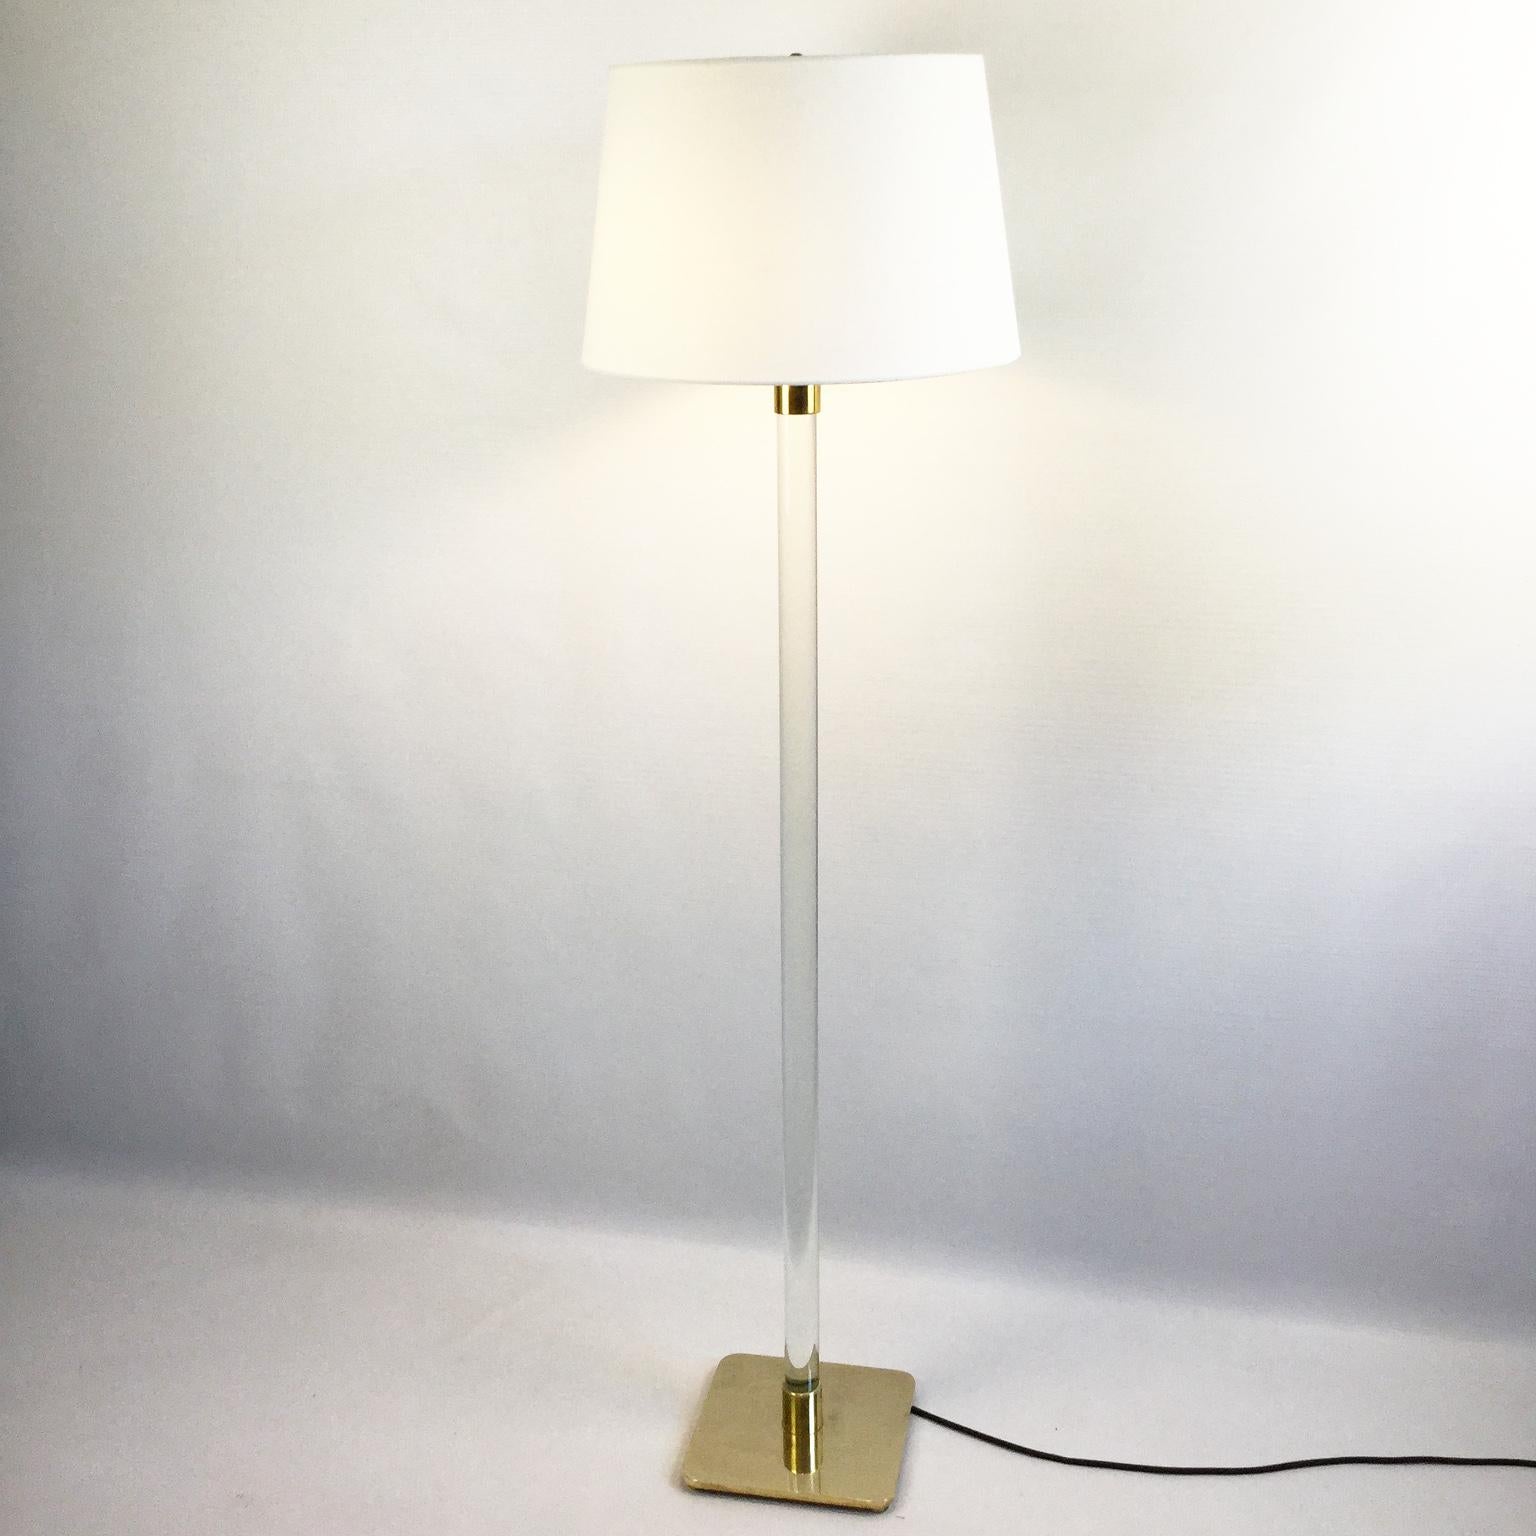 1970s Hansen Lighting Company floor lamp with glass rod and brass base
Signed on base Hansen Lamps New York.
This lamp has the patented spin switch which turns 1 bulb on, 2 bulbs and all 3 bulbs on
Rewired with black cotton-insulated cable
Shade